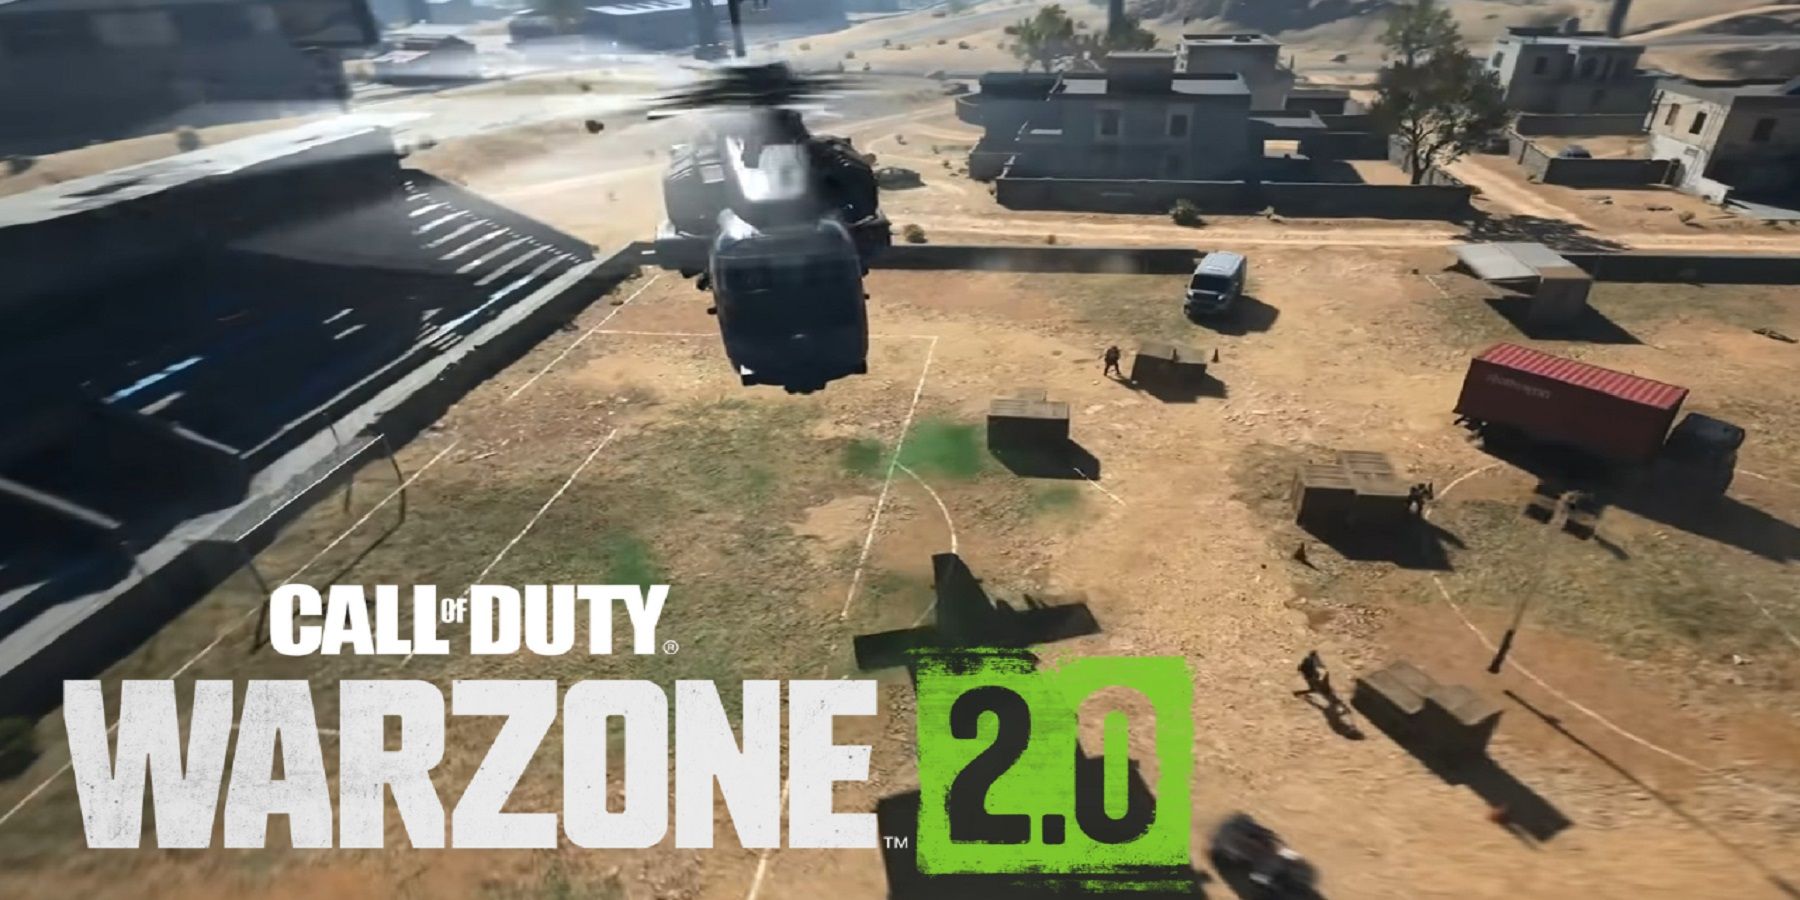 Call-of-duty-warzone-2-1